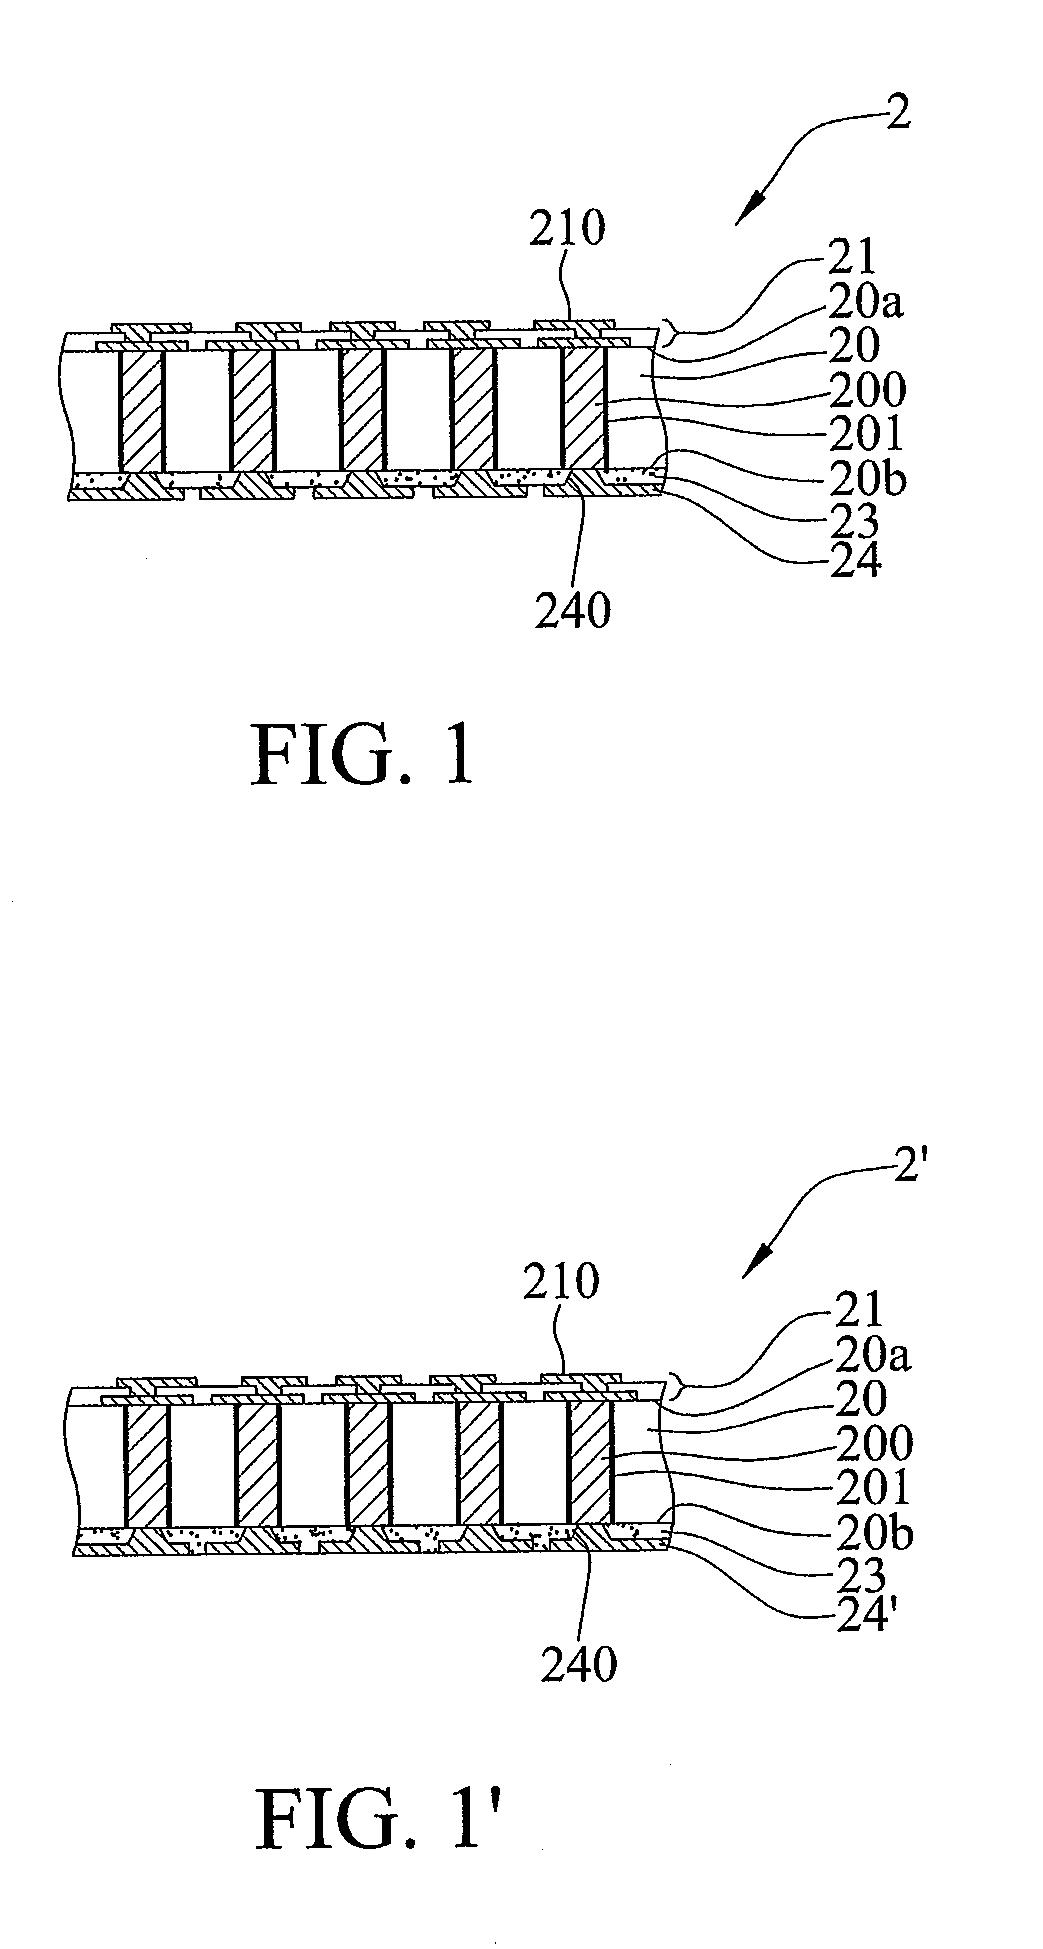 Package substrate having photo-sensitive dielectric layer and method of fabricating the same